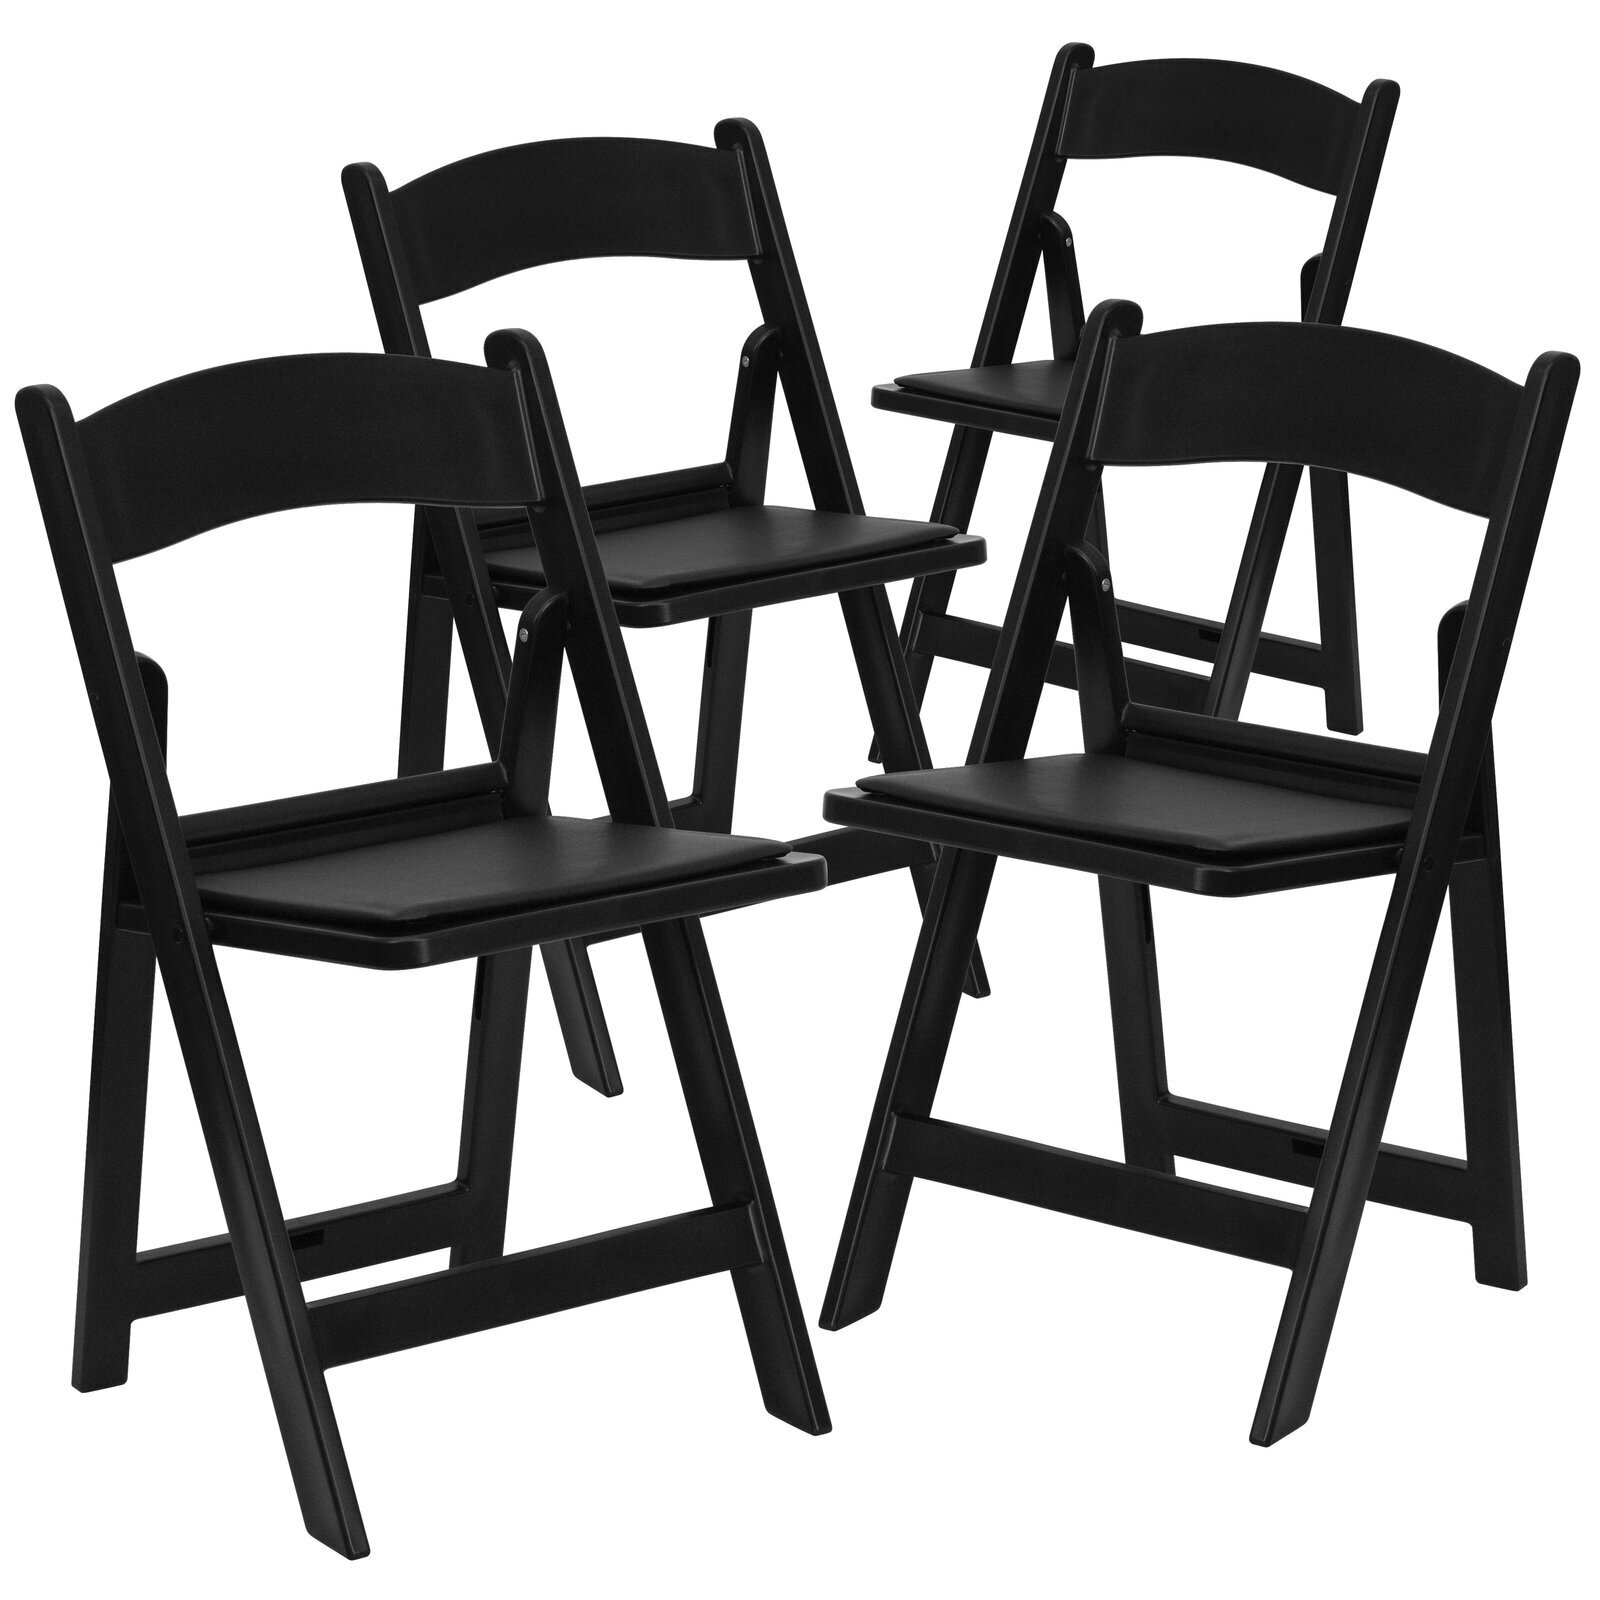 Set of Four Antique Wooden Folding Chairs